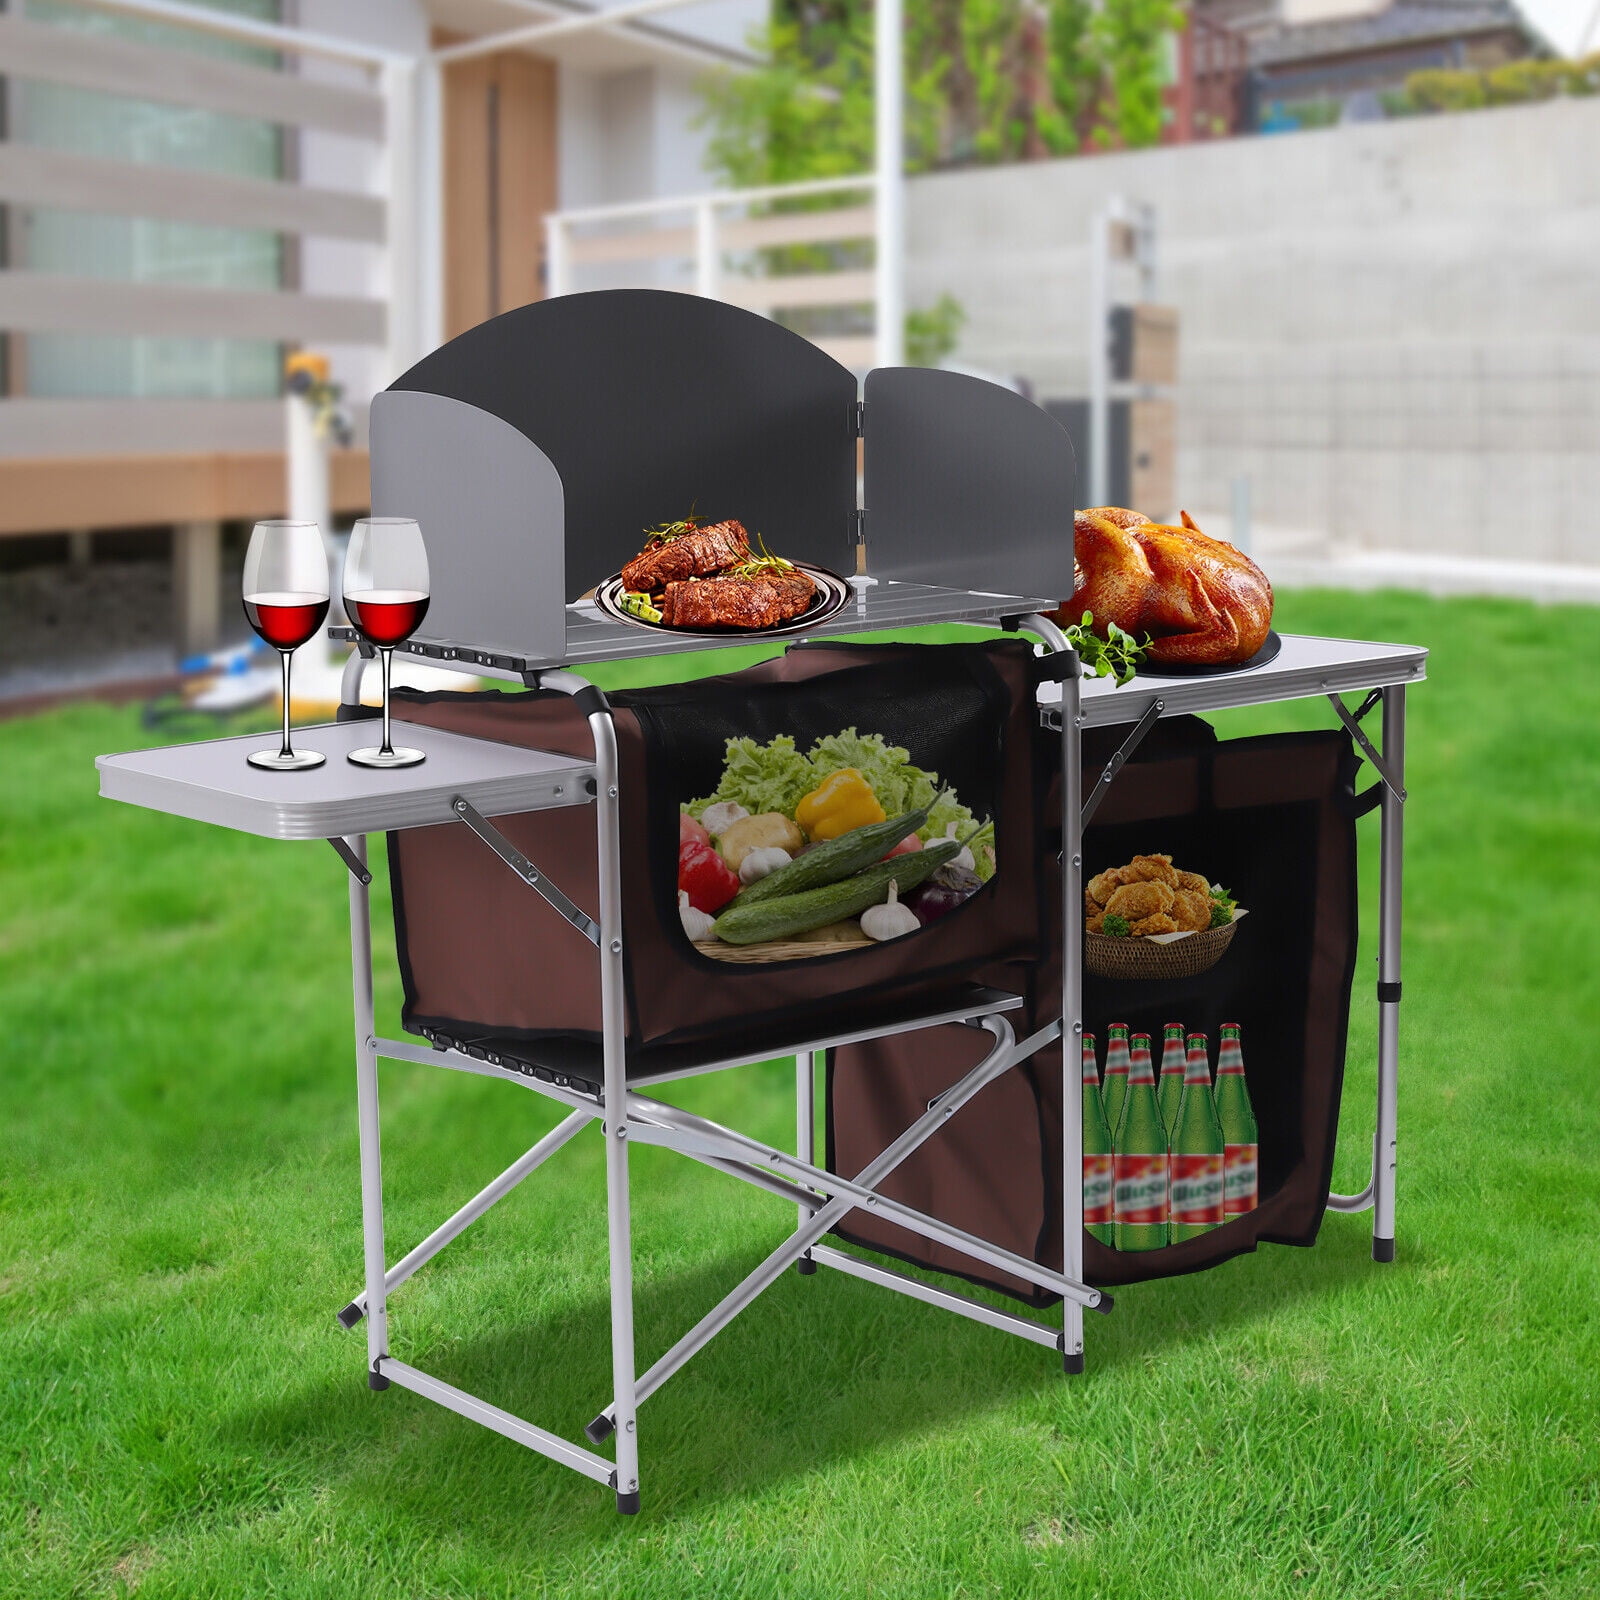 Gendanne banan Glat Camping Kitchen Table Folding Grill Cook Storage Picnic Cabinet Portable  Outdoor Folding Camping Kitchen Grilling Stand Table Cooking Station  Outdoor Portable - Walmart.com